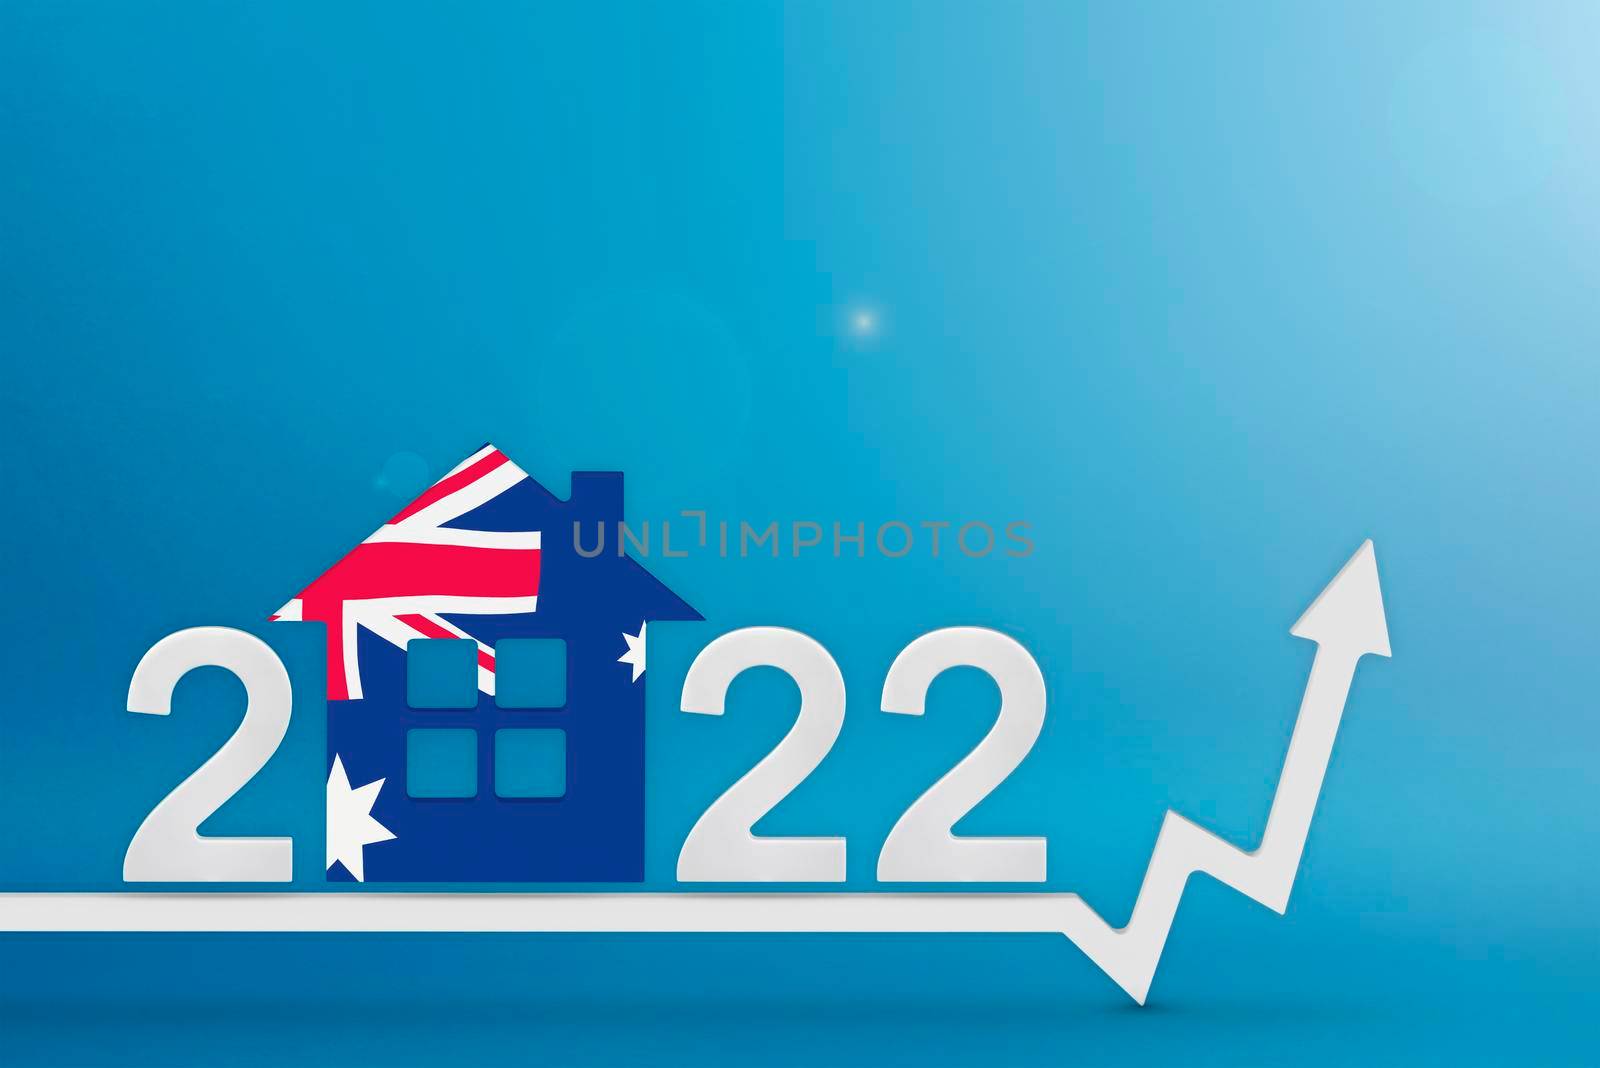 The cost of real estate in Australia in 2022. Rising cost of construction, insurance, rent in Australia. House model painted in the colors of the flag, up arrow on a blue background.